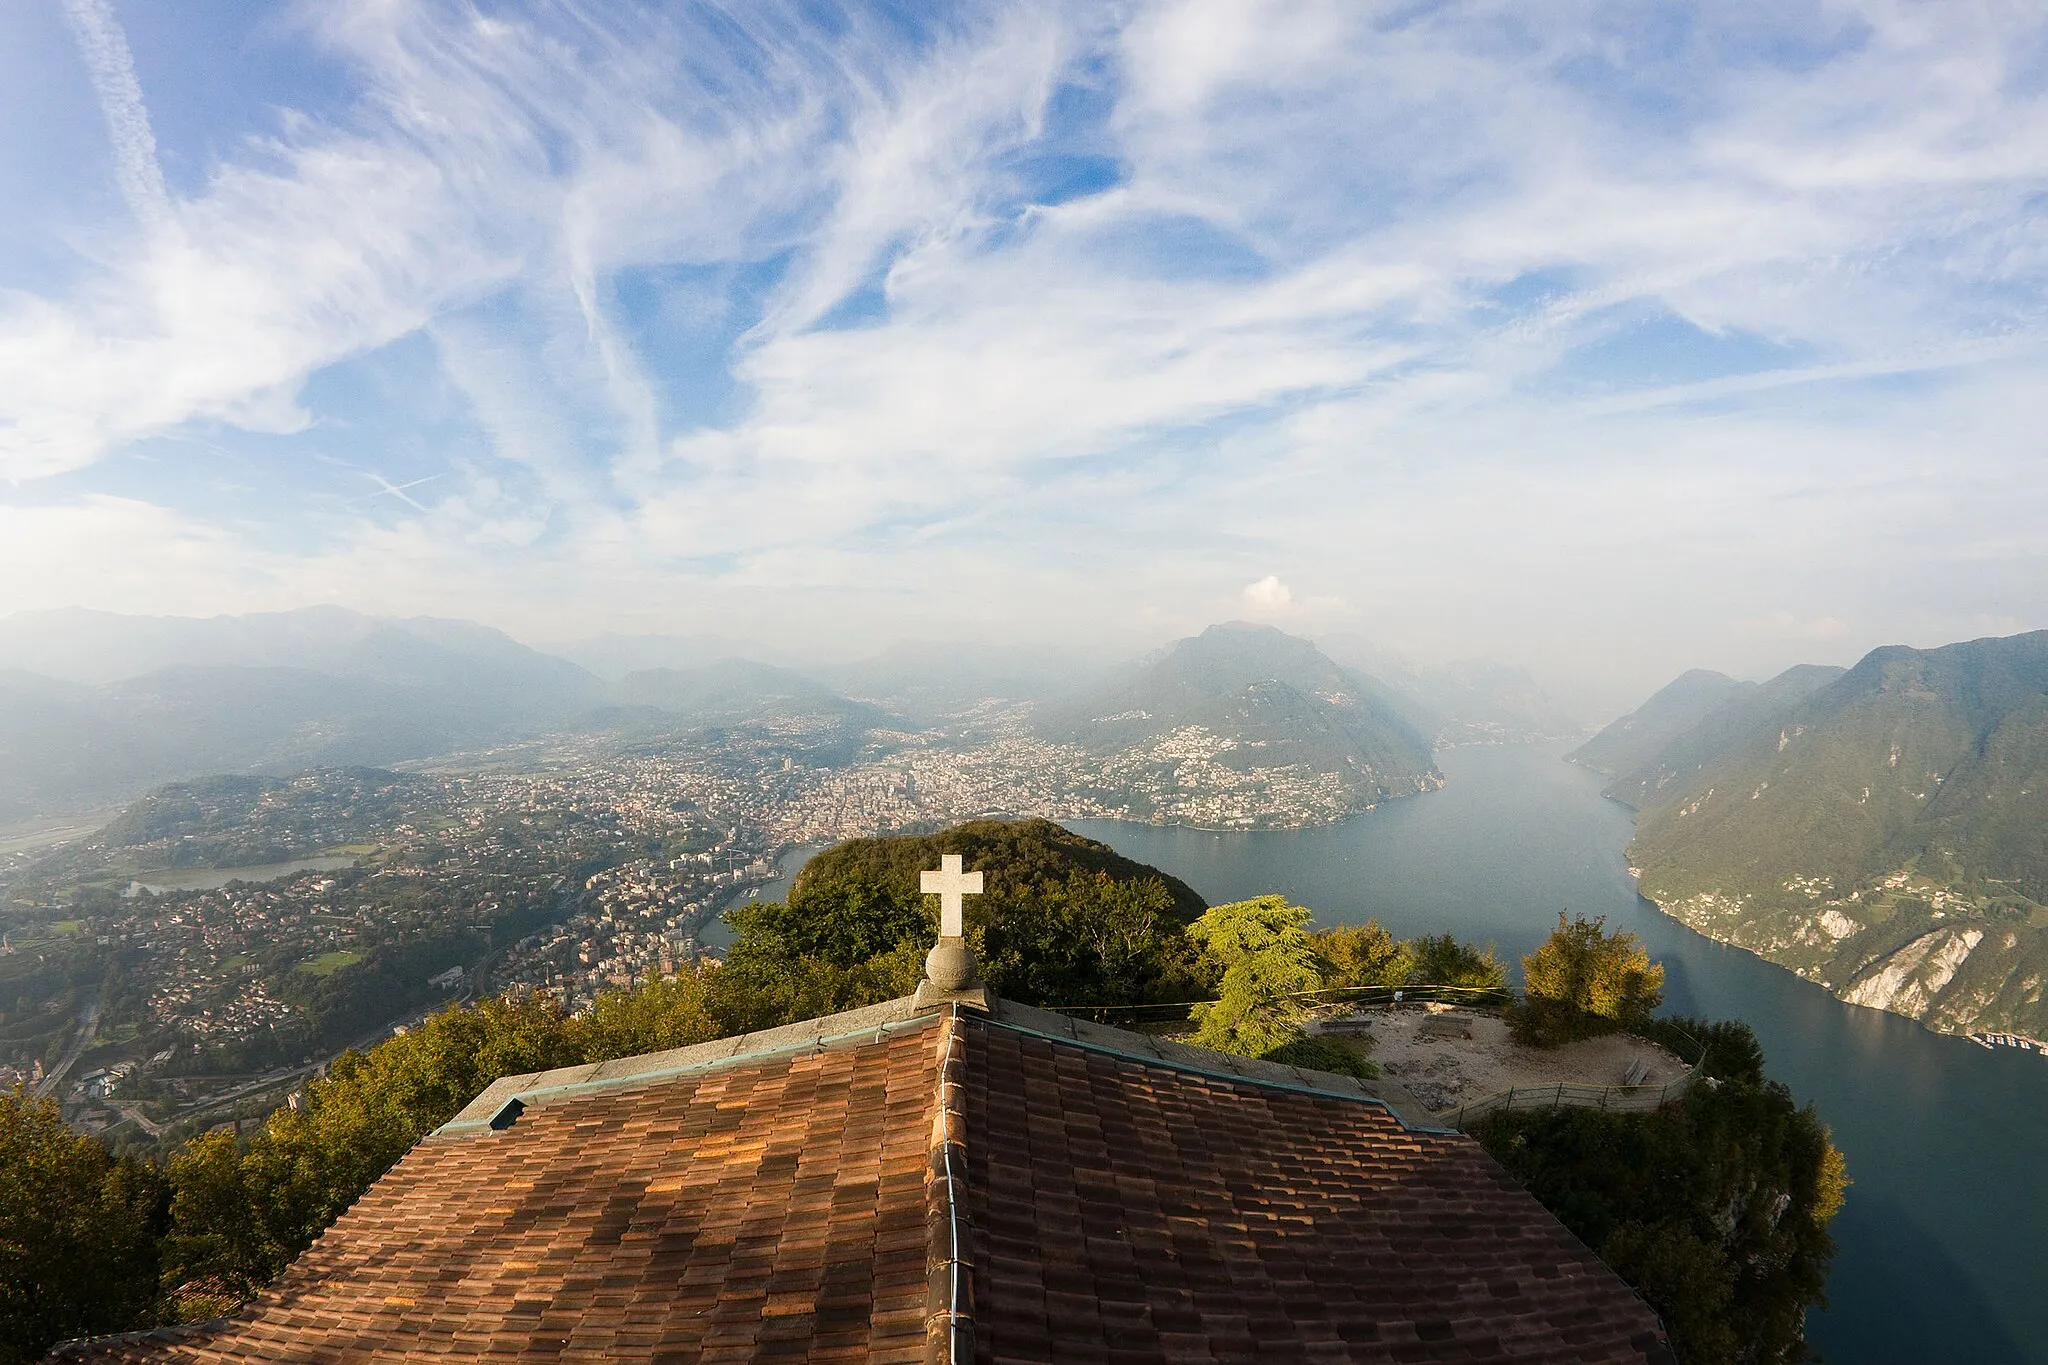 Photo showing: View of the City of Lugano and its surroundings from the top of Monte San Salvatore. On the foreground: the church of San Salvatore, built at the top of the mountain of the same name.